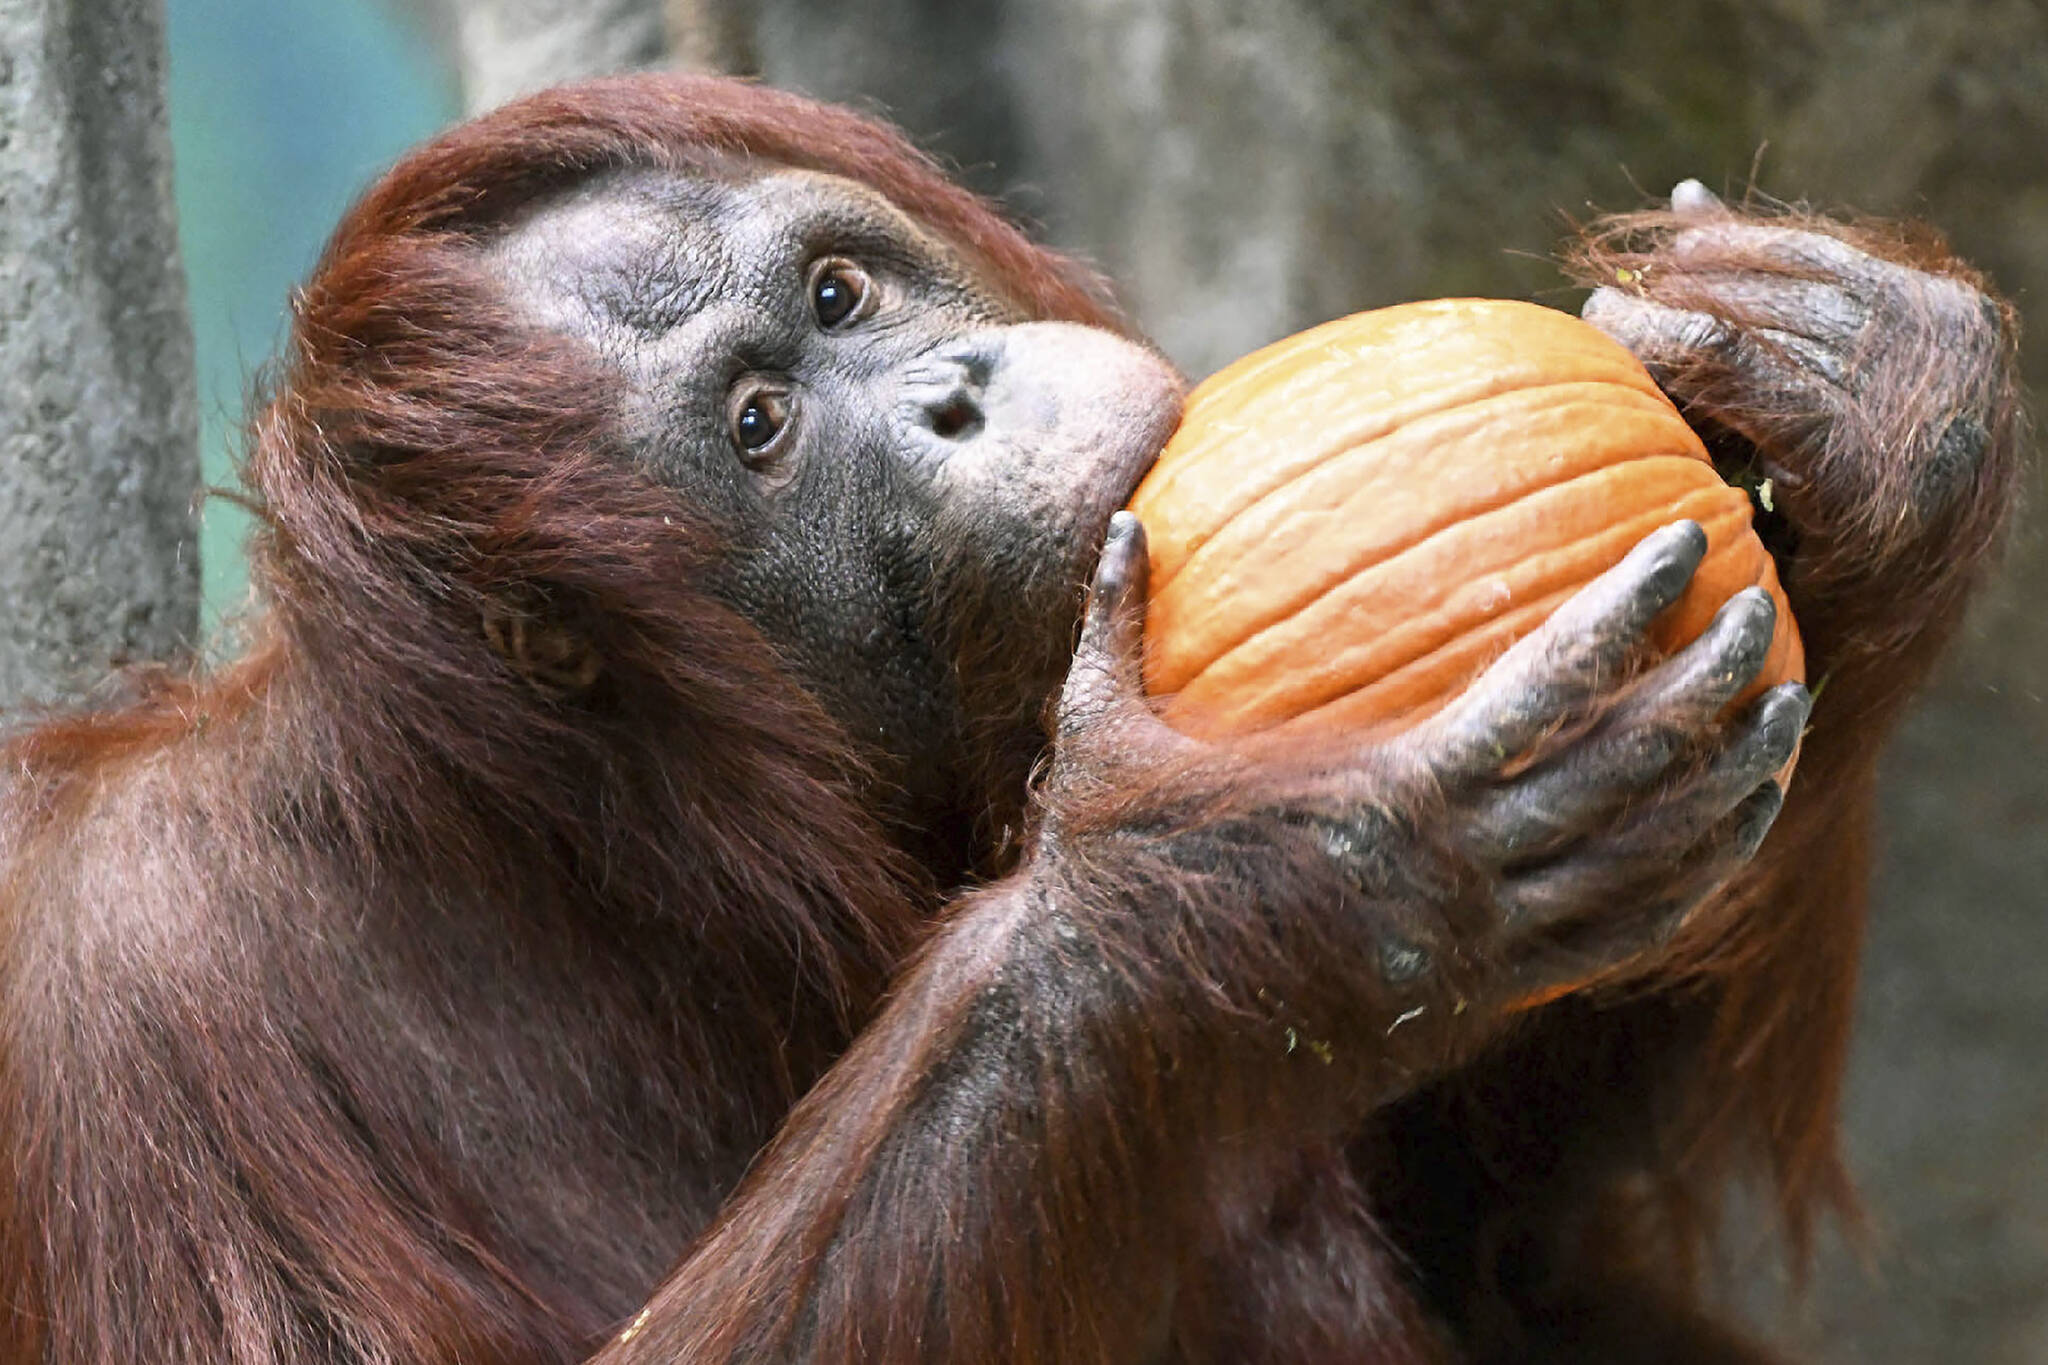 In this photo provided by the Chicago Zoological Society, Sophia, an orangutan, takes a bite out of a pumpkin to get to the gooey pulp and seeds, at Brookfield Zoo, Tuesday, Oct. 17, 2023, in Brookfield, Ill. This week, several animals at Brookfield Zoo received Halloween treats, pumpkins, for enrichment. (Jim Schulz/Chicago Zoological Society via AP)